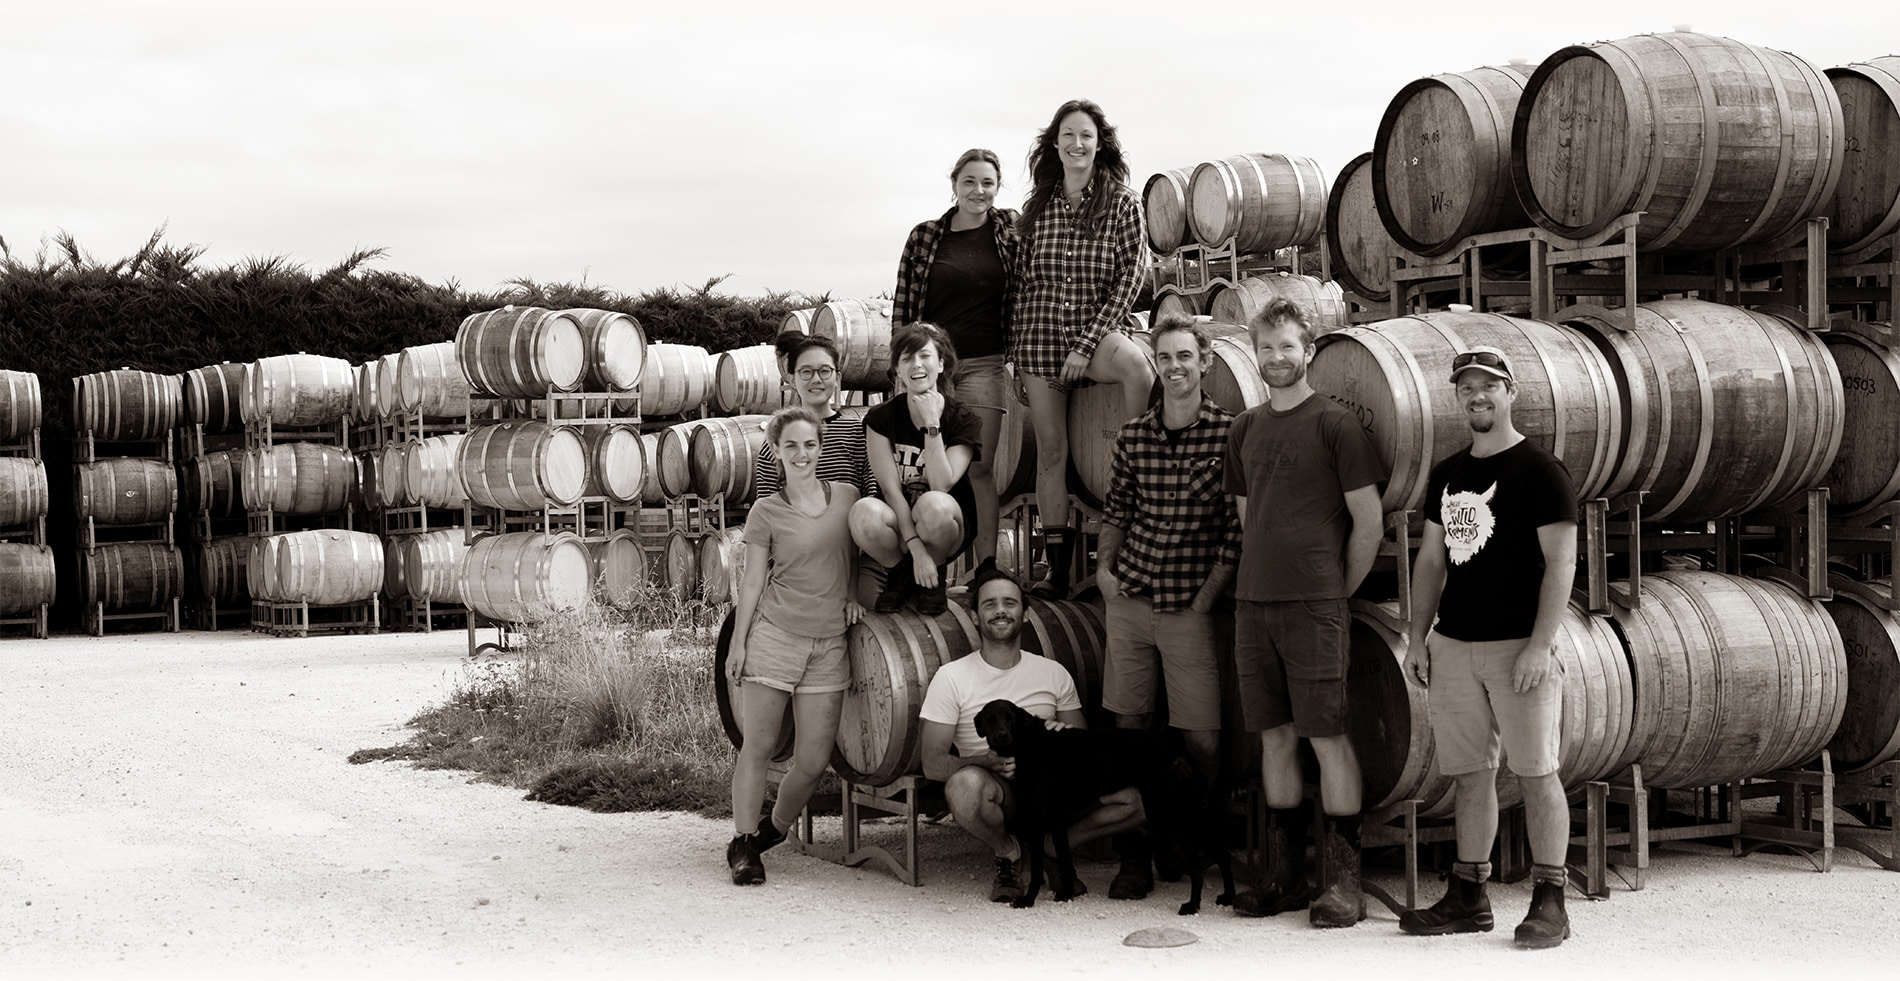 The Greystone Team in front of hundreds of wine barrels